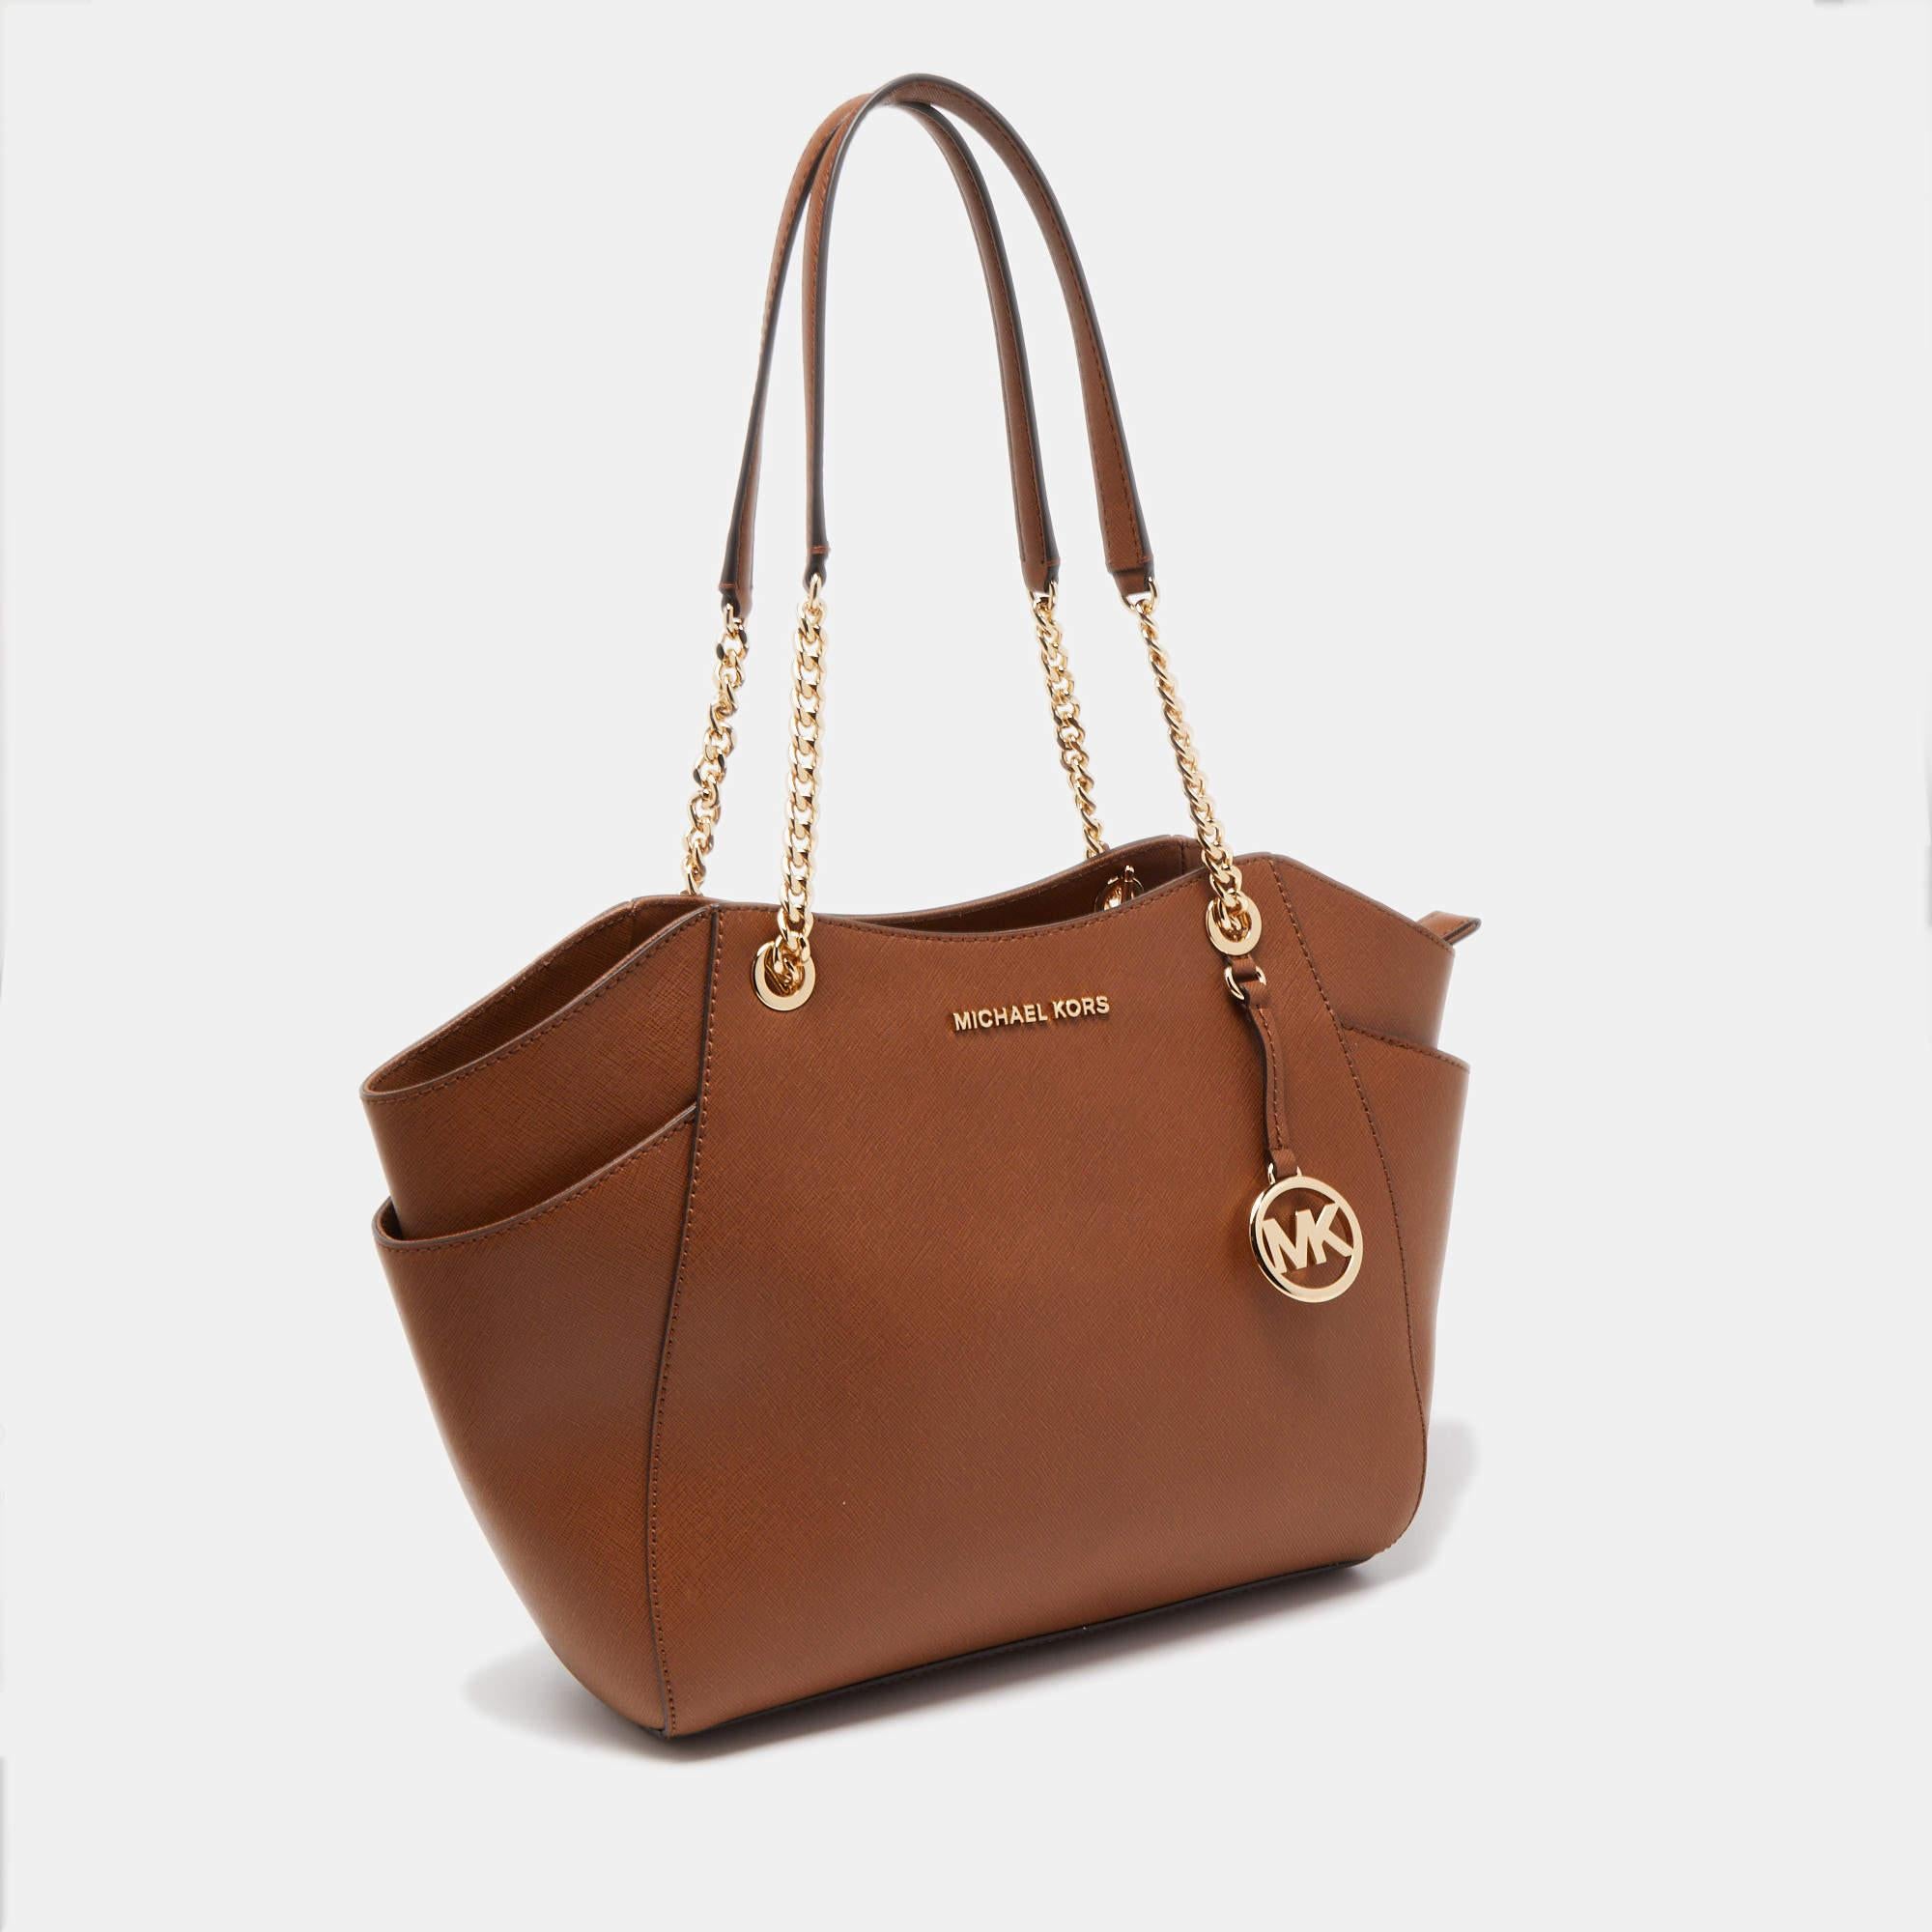 Timelessly elegant and stylish, Michael Kors's collections capture the effortless, nonchalant finesse of the modern woman. Crafted from leather, this chic Jet Set tote features a spacious interior. The sleek, understated silhouette is punctuated